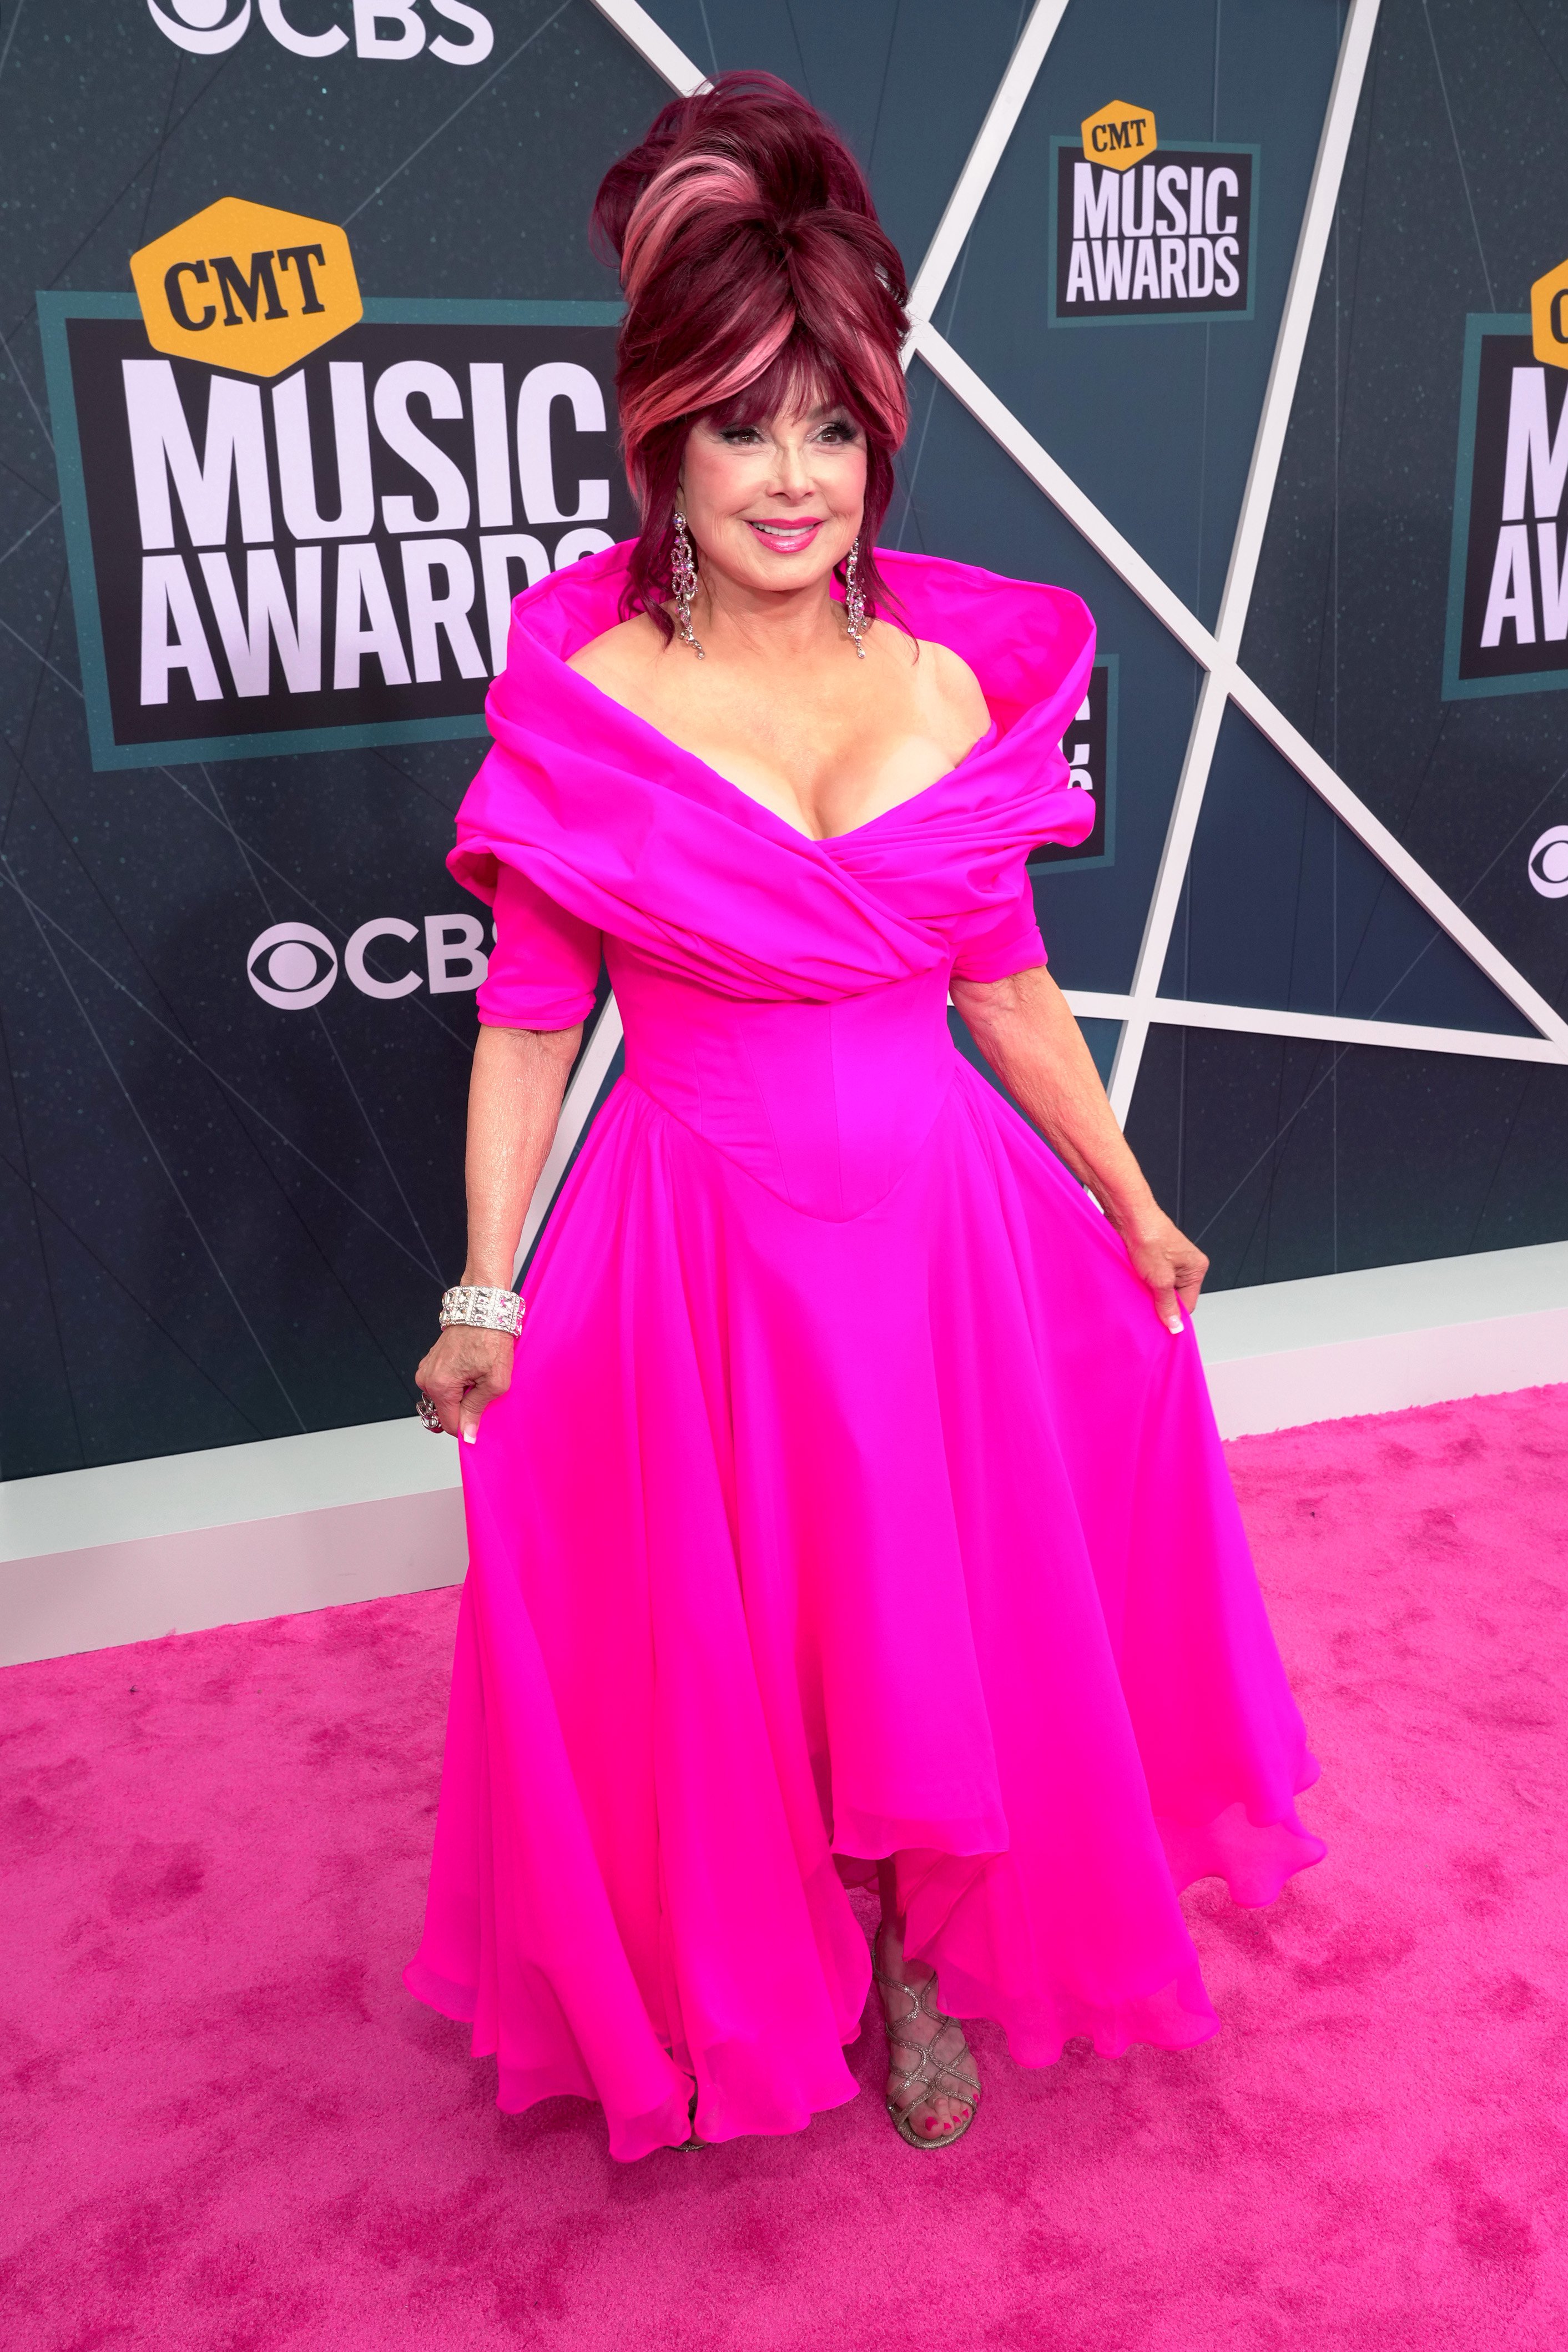  Naomi Judd of The Judds attends the 2022 CMT Music Awards at Nashville Municipal Auditorium on April 11, 2022 in Nashville, Tennessee. | Source: Getty Images